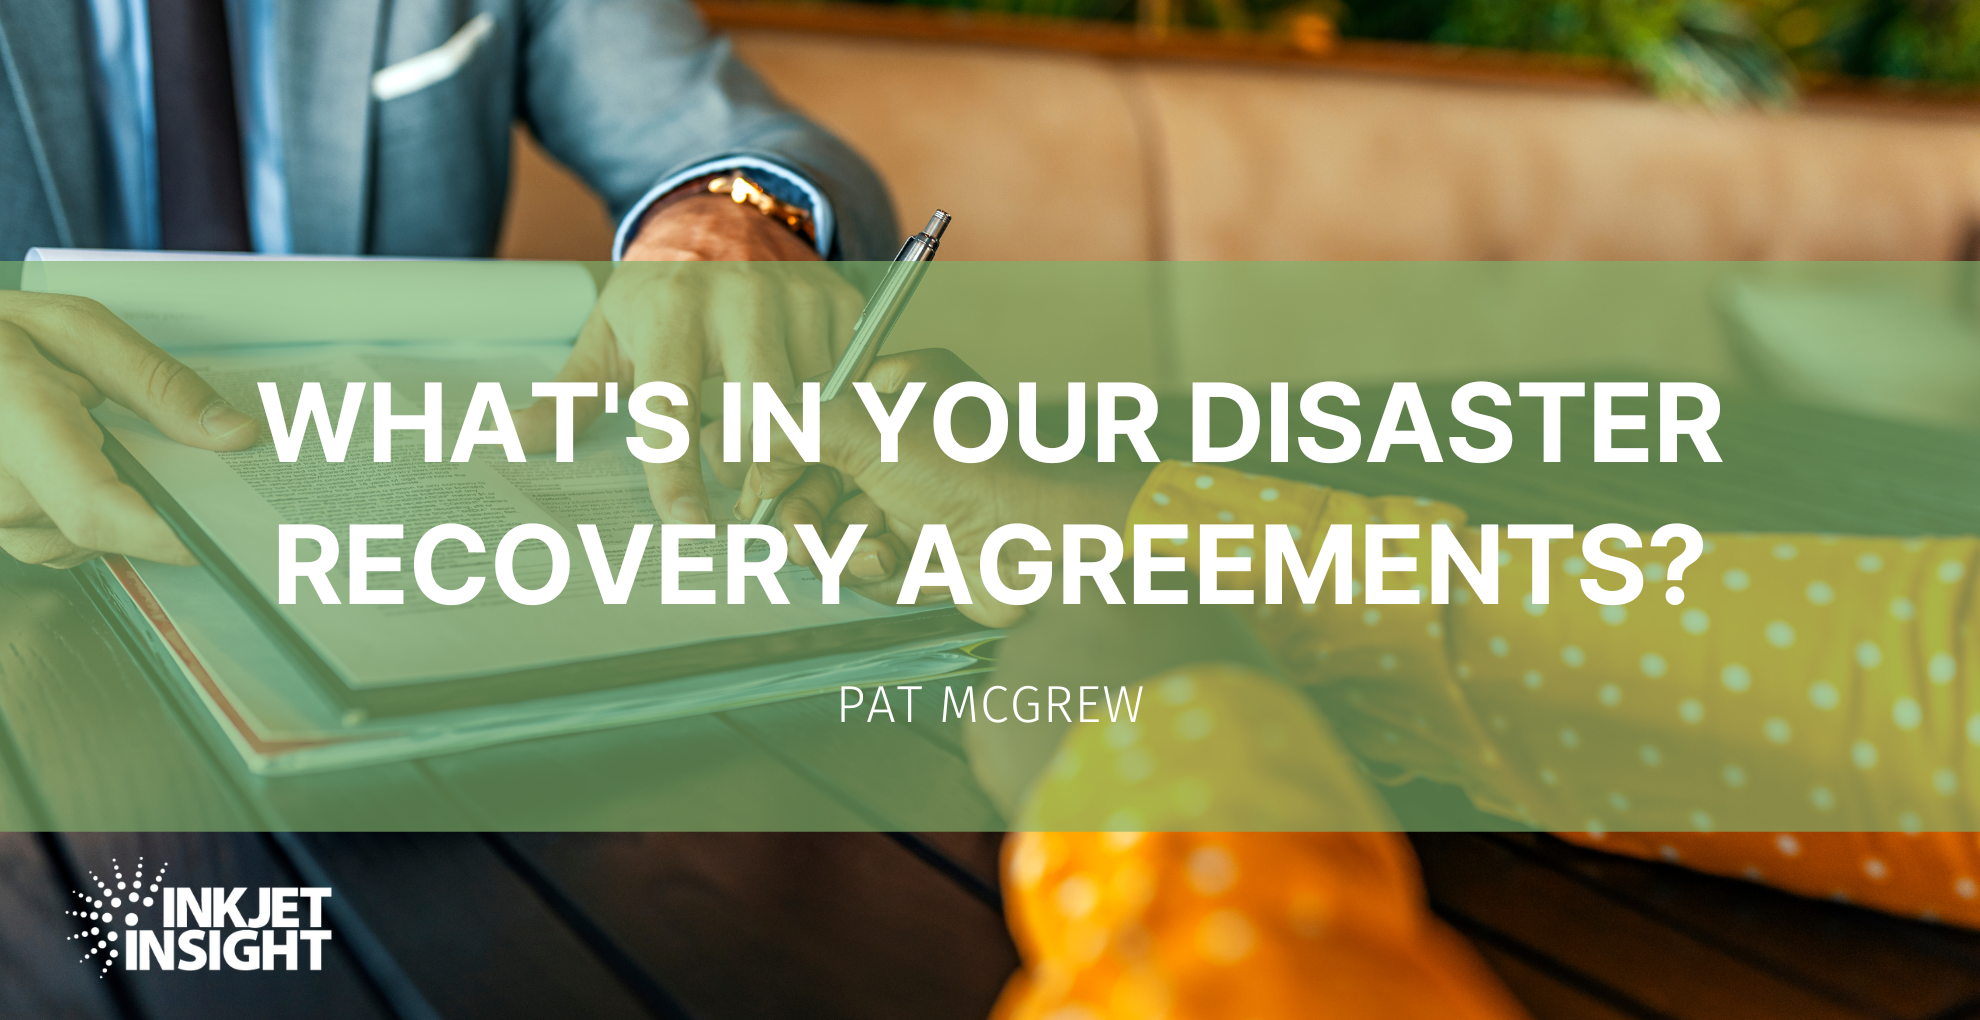 Featured image for “What’s in YOUR Disaster Recovery Agreements?”